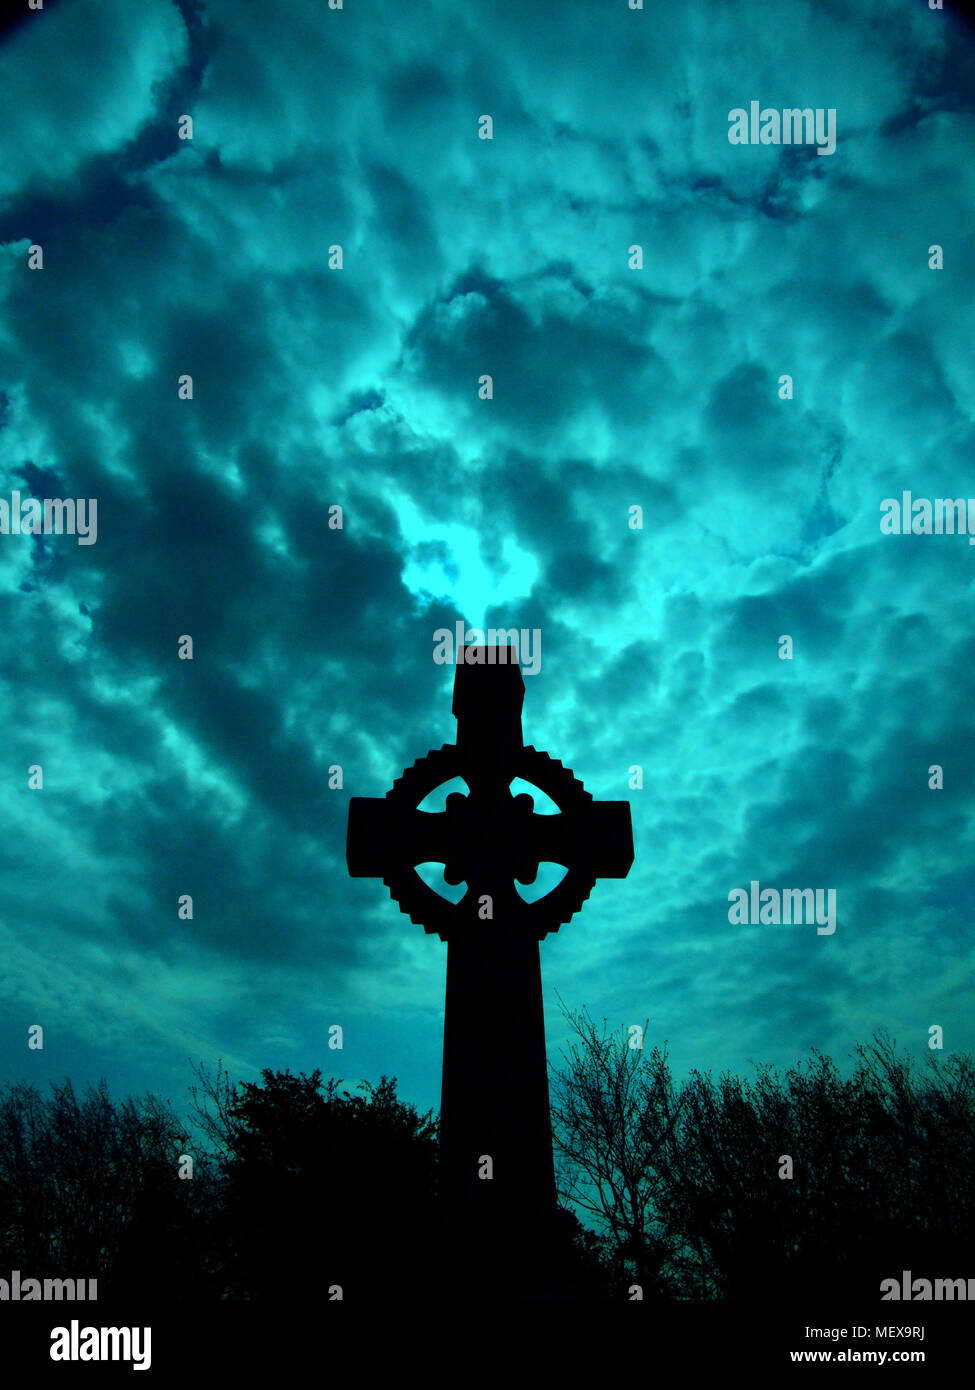 Celtic Cross from a low angle with clouds of a blue hue floating above Stock Photo